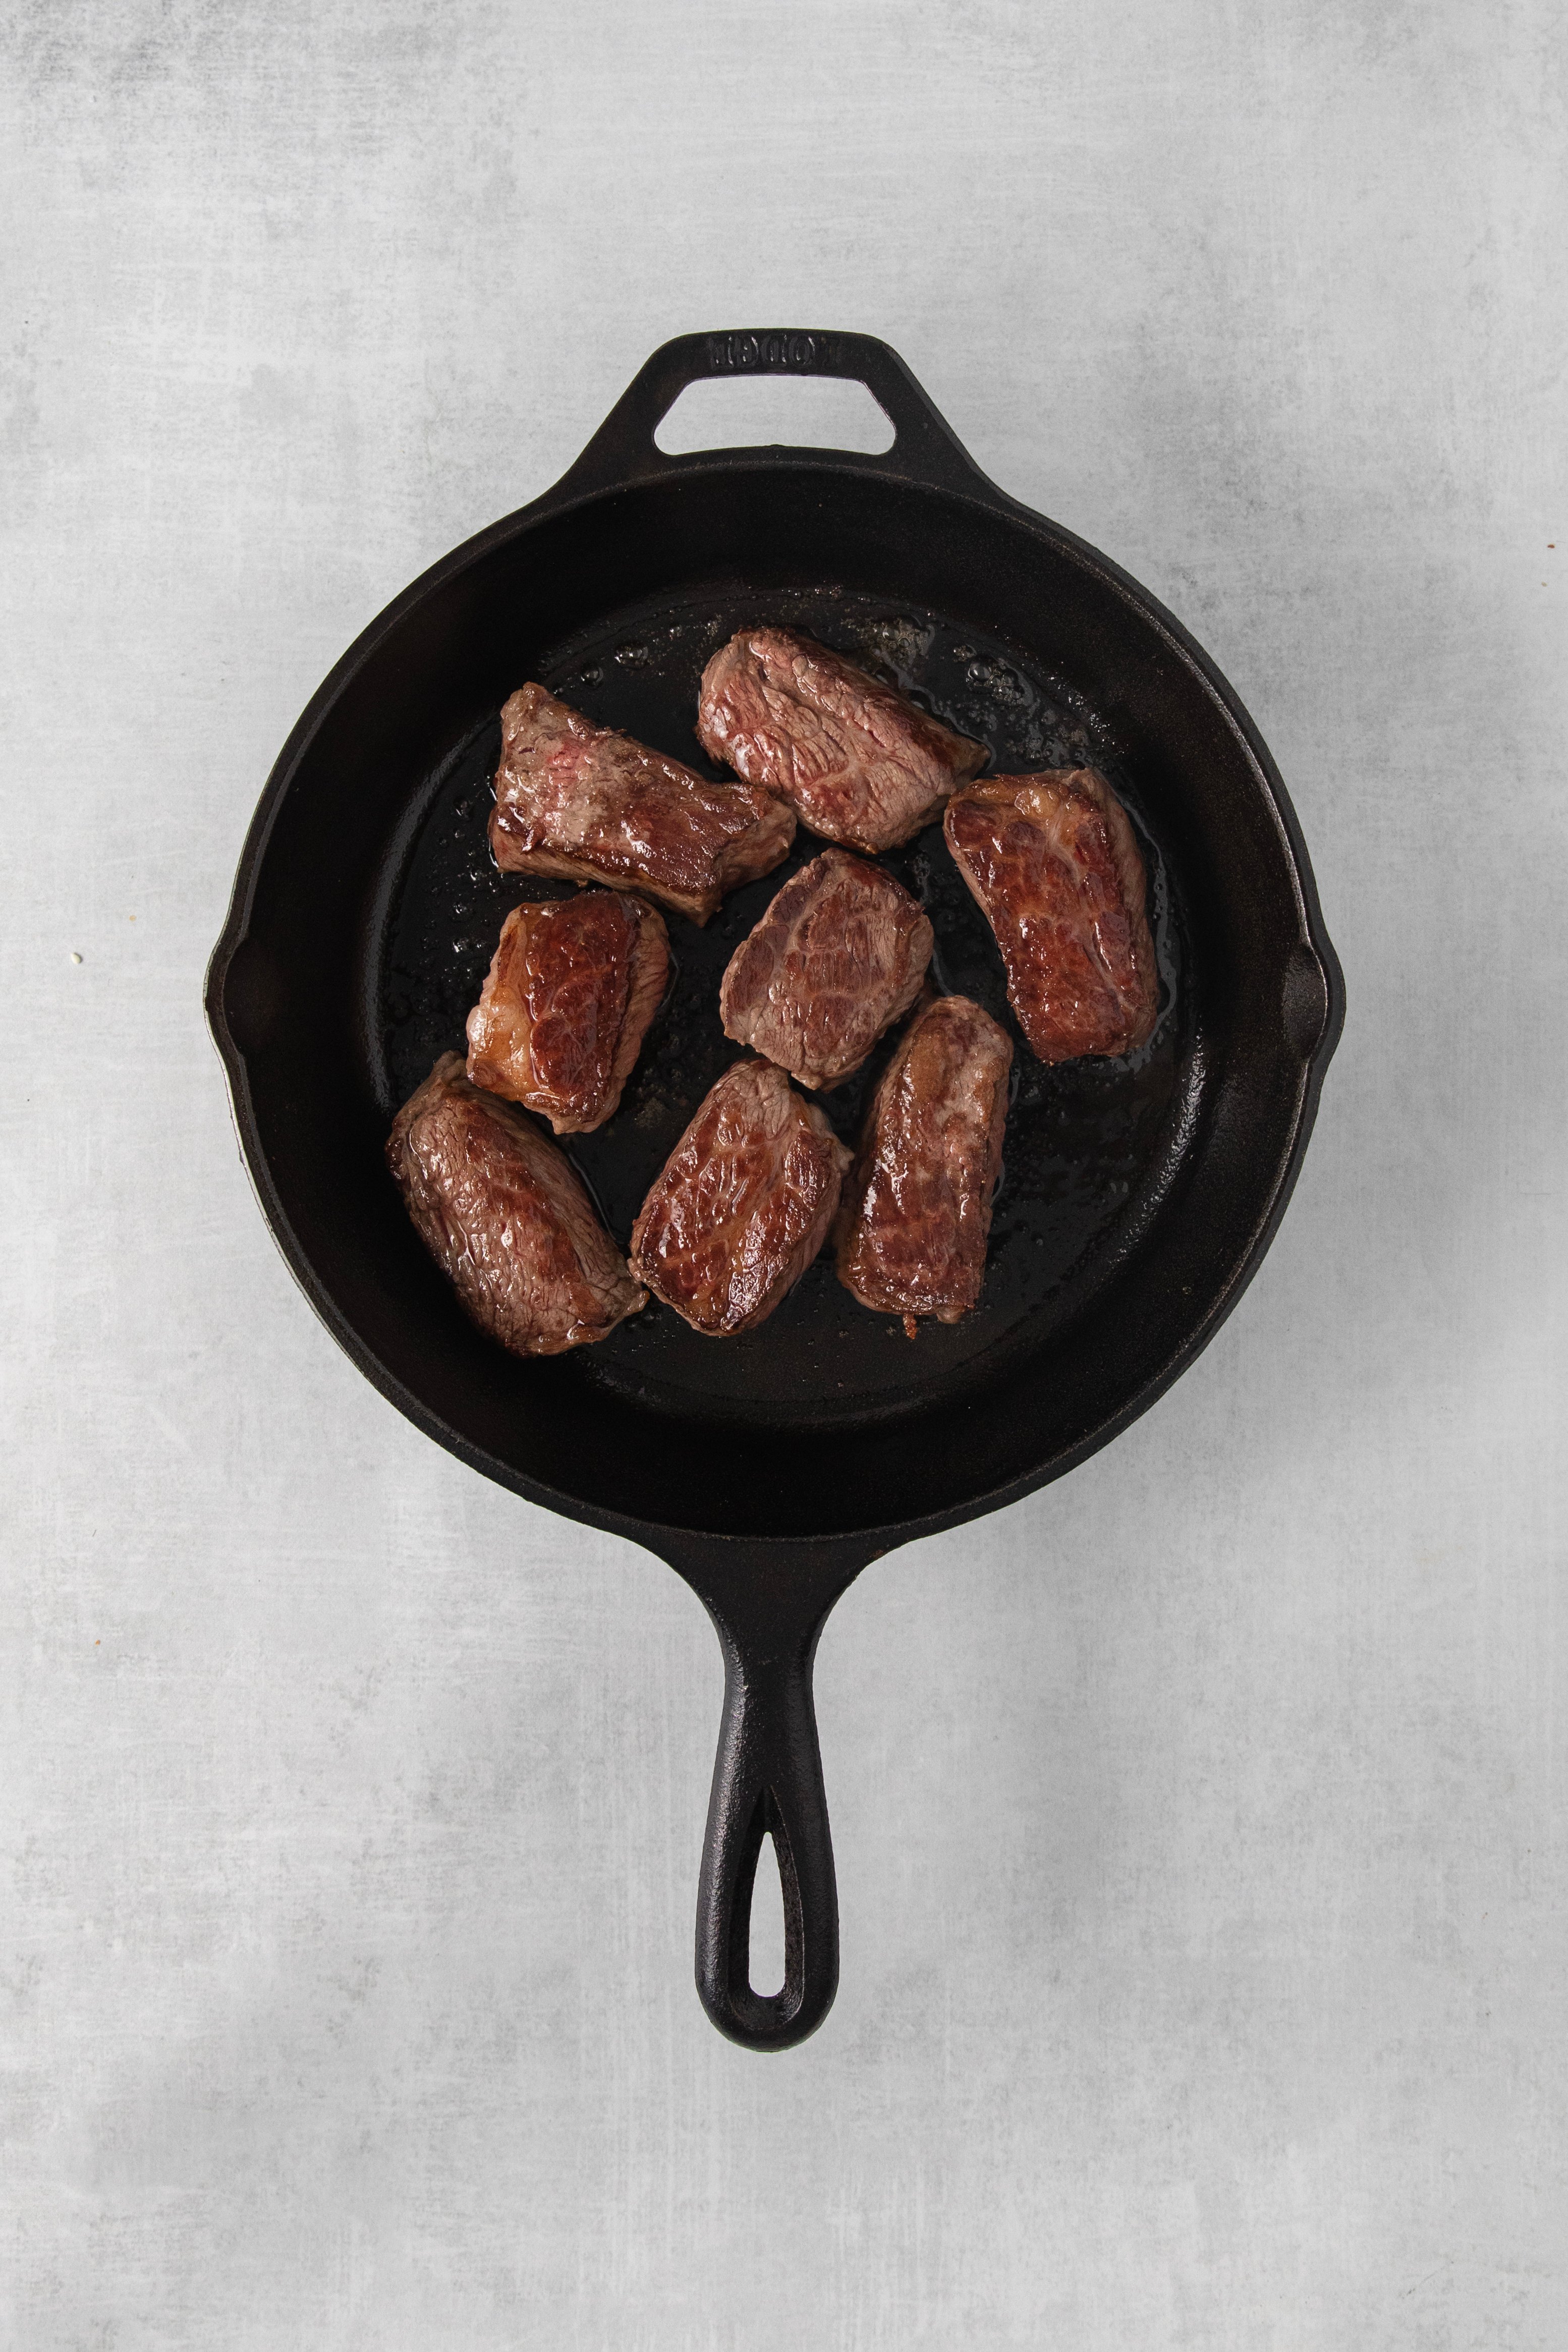 over a pan with seared beef cubes.